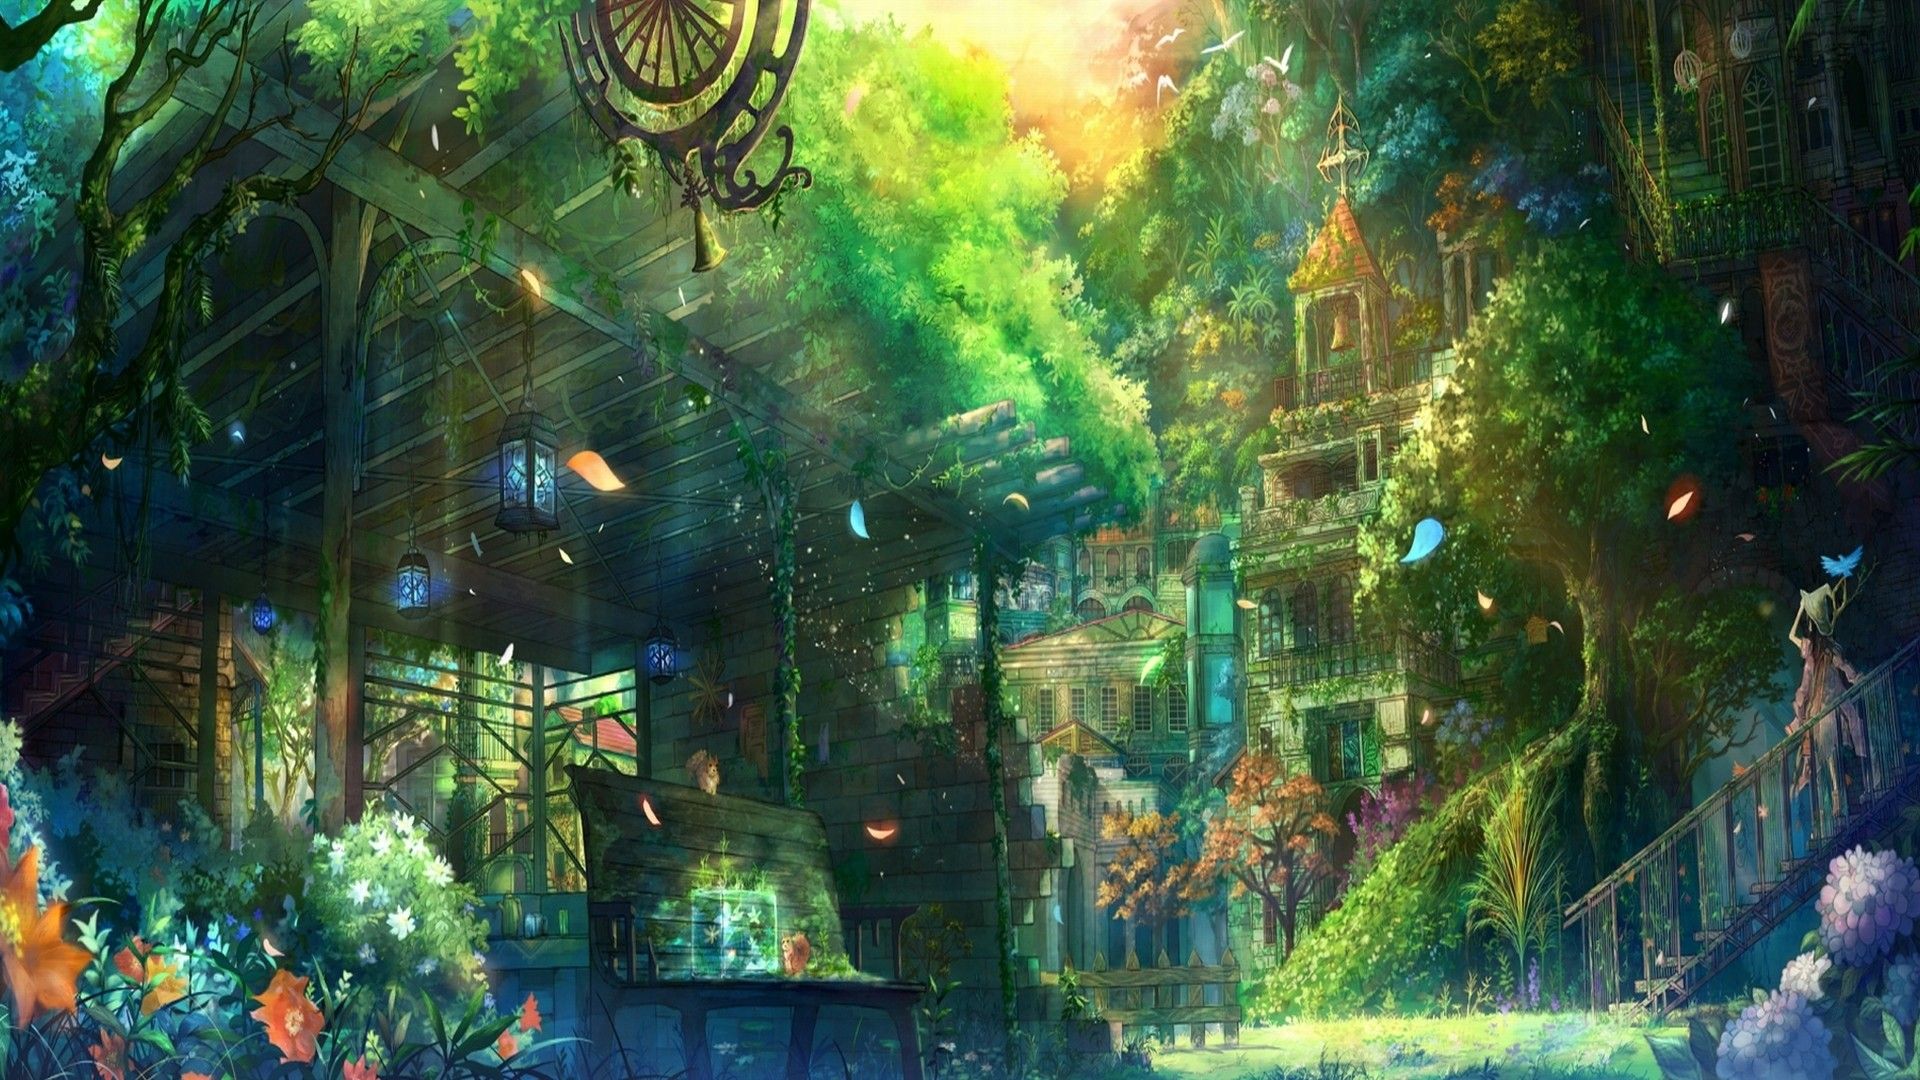 Anime City Scenery Wallpaper High Definition with High Definition Wallpaper px 1.44 MB